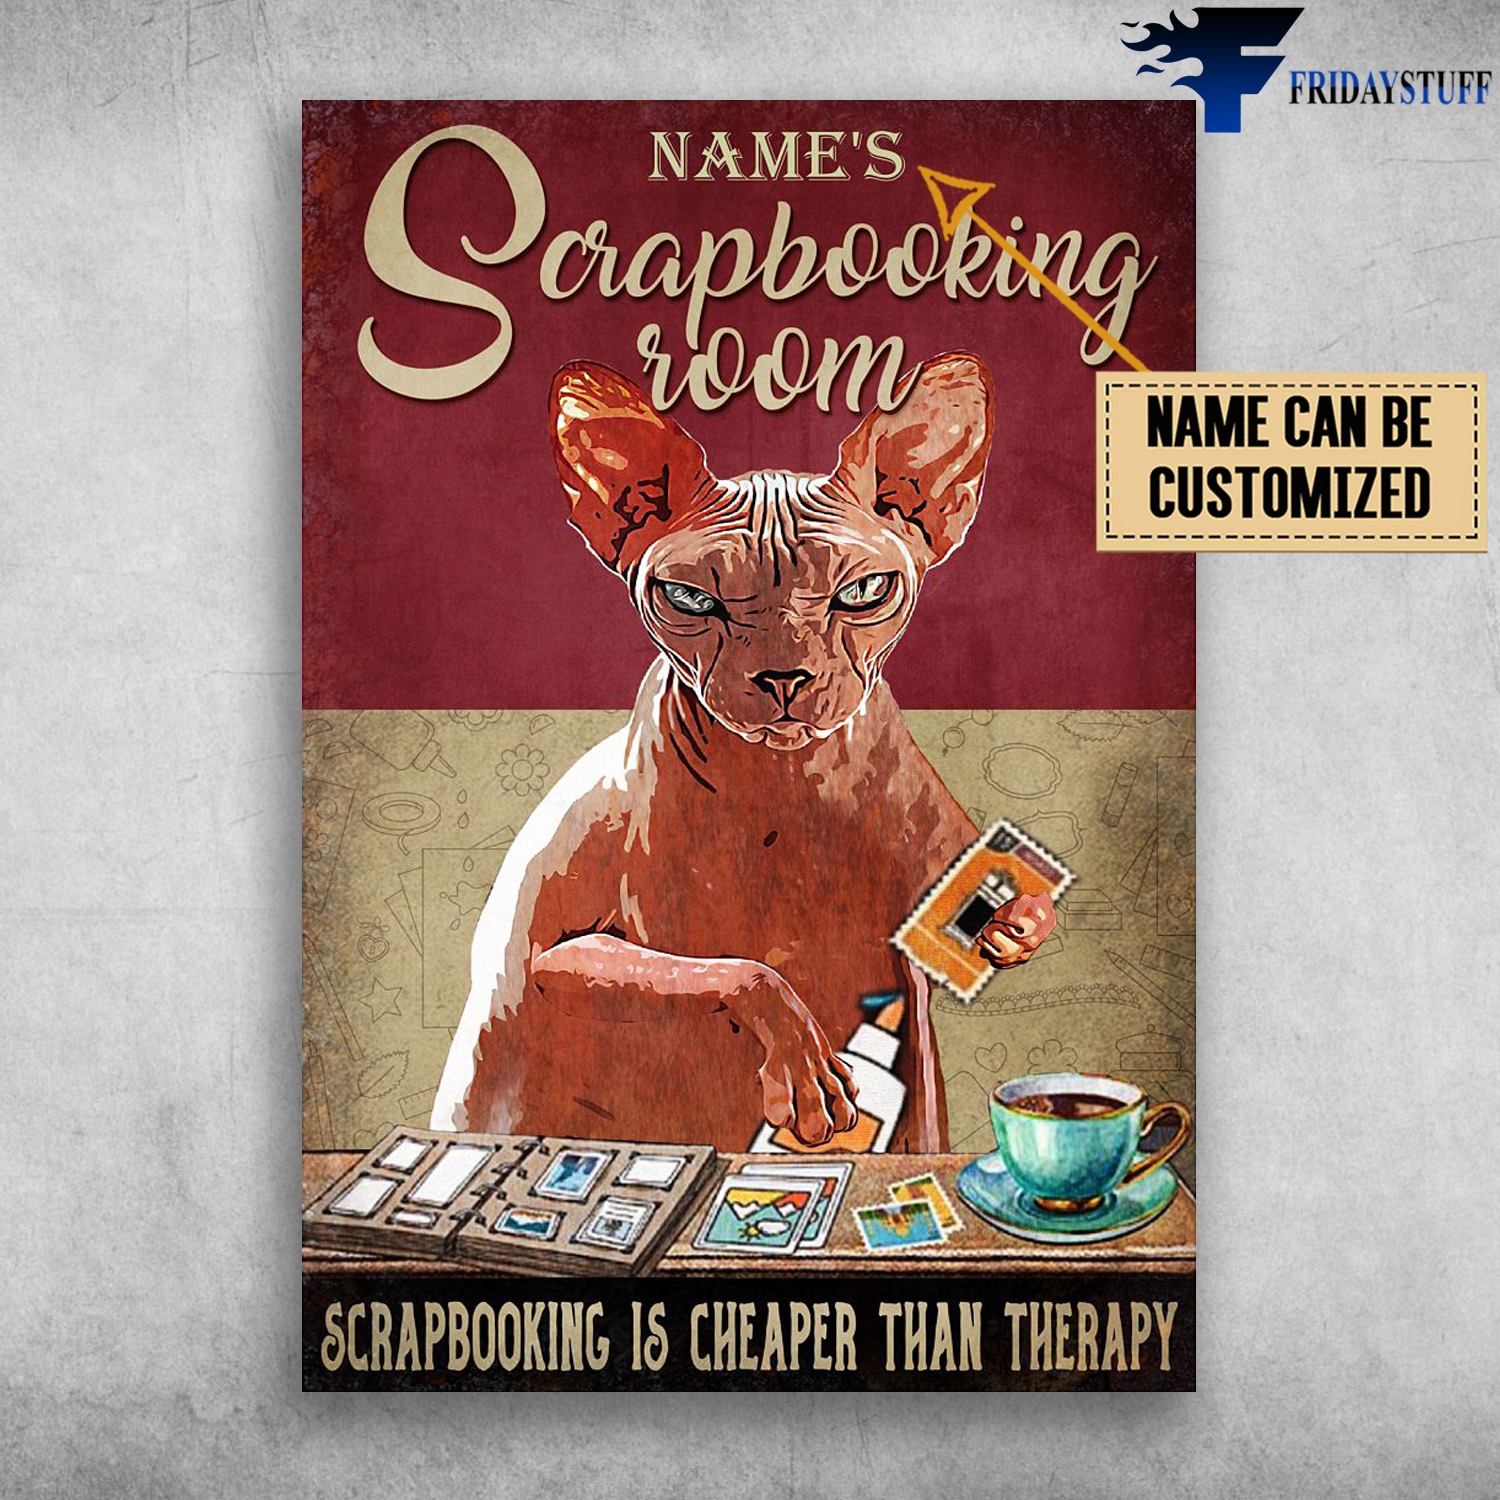 Sphynx Cat, Scrapbooking Room, Scrapbooking Is Cheaper Than Therapy